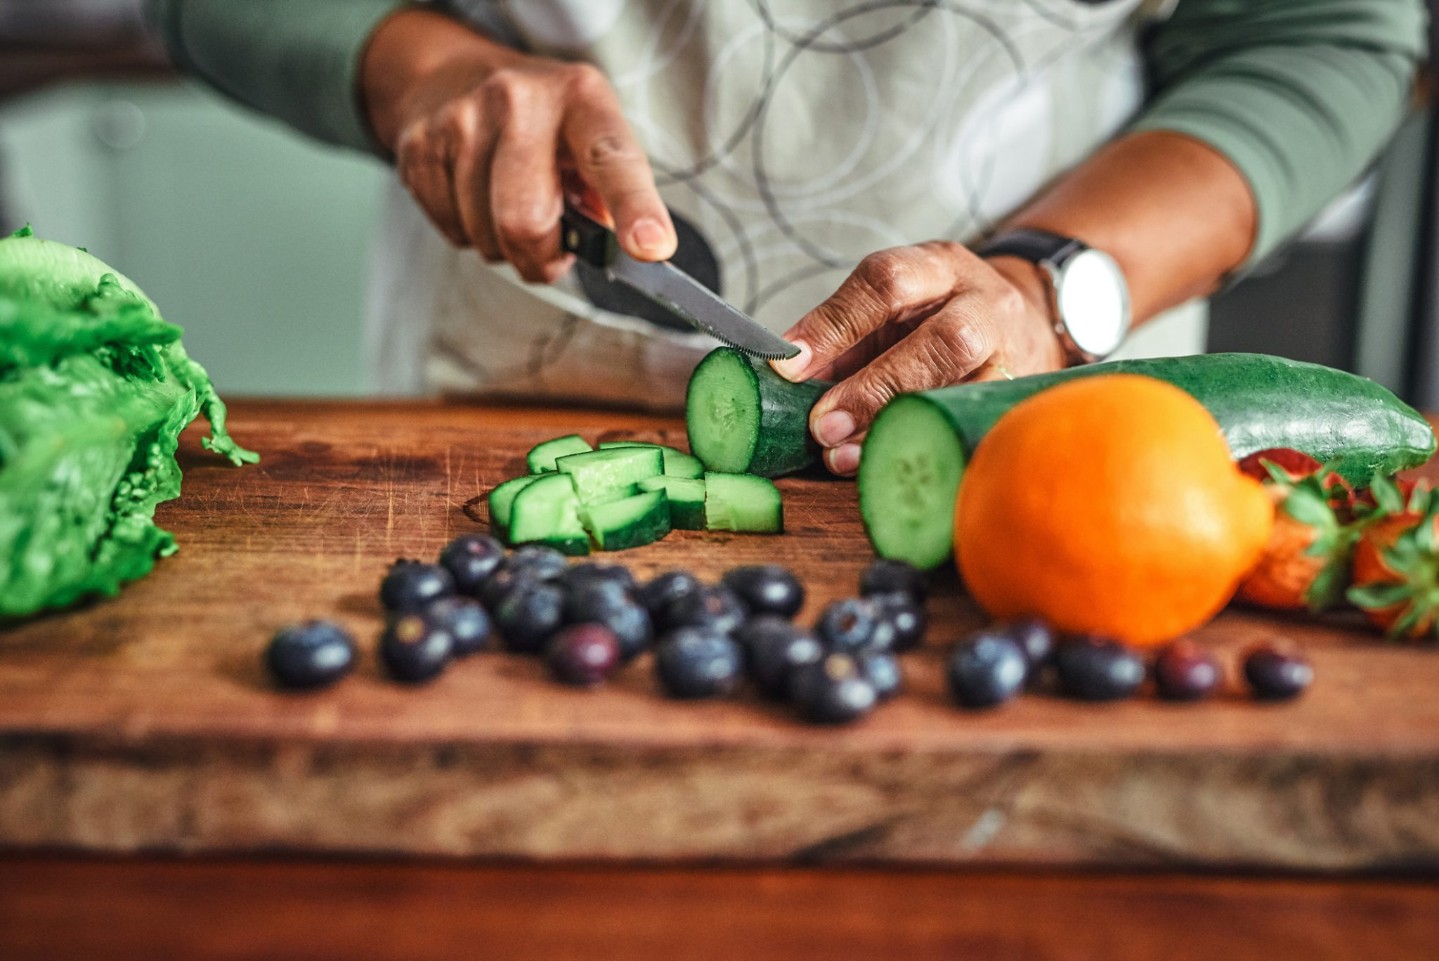 Picture of man cutting vegetables and fruits that can help with cancer prevention like cucumber, oranges, and blueberries.